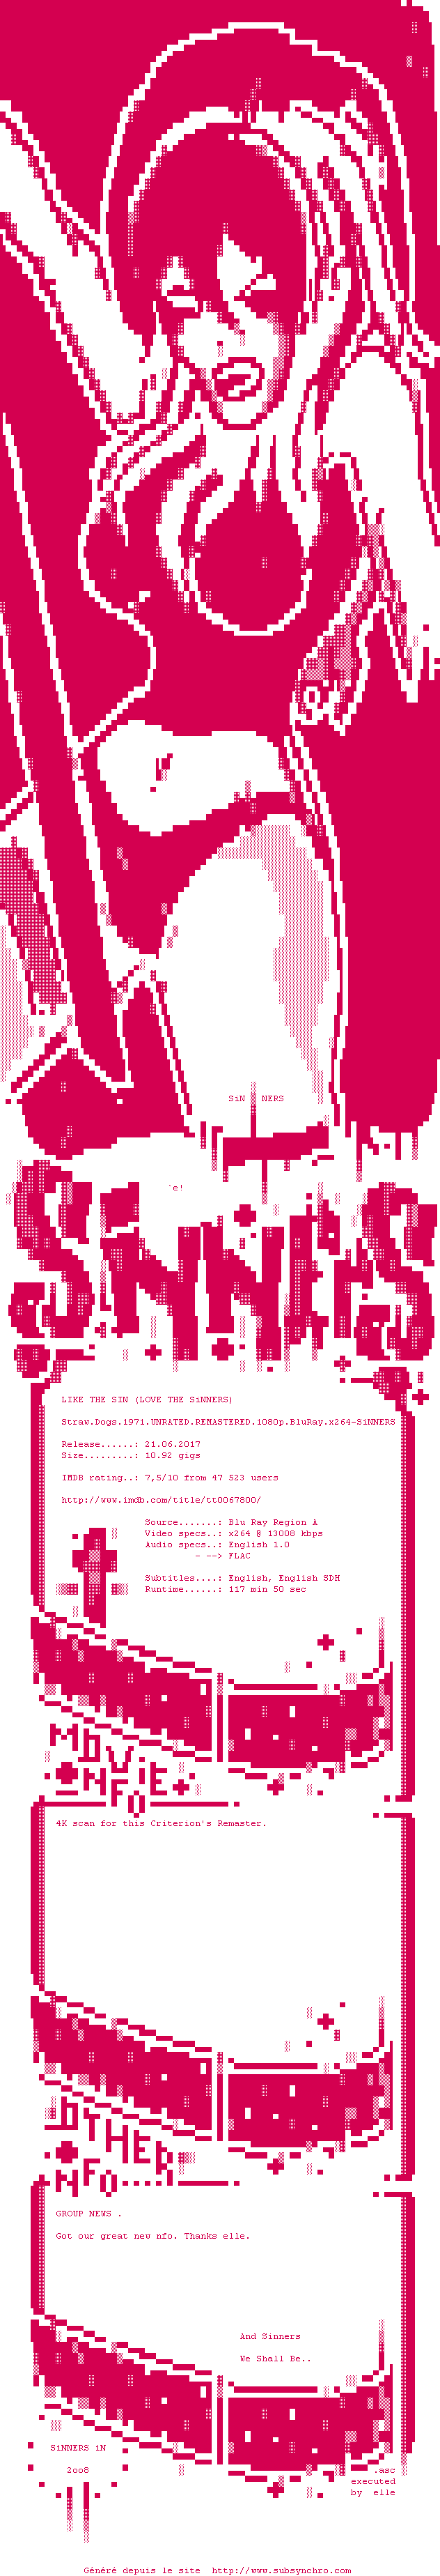 Nfo de la release Straw.Dogs.1971.UNRATED.REMASTERED.1080p.BluRay.x264-SiNNERS